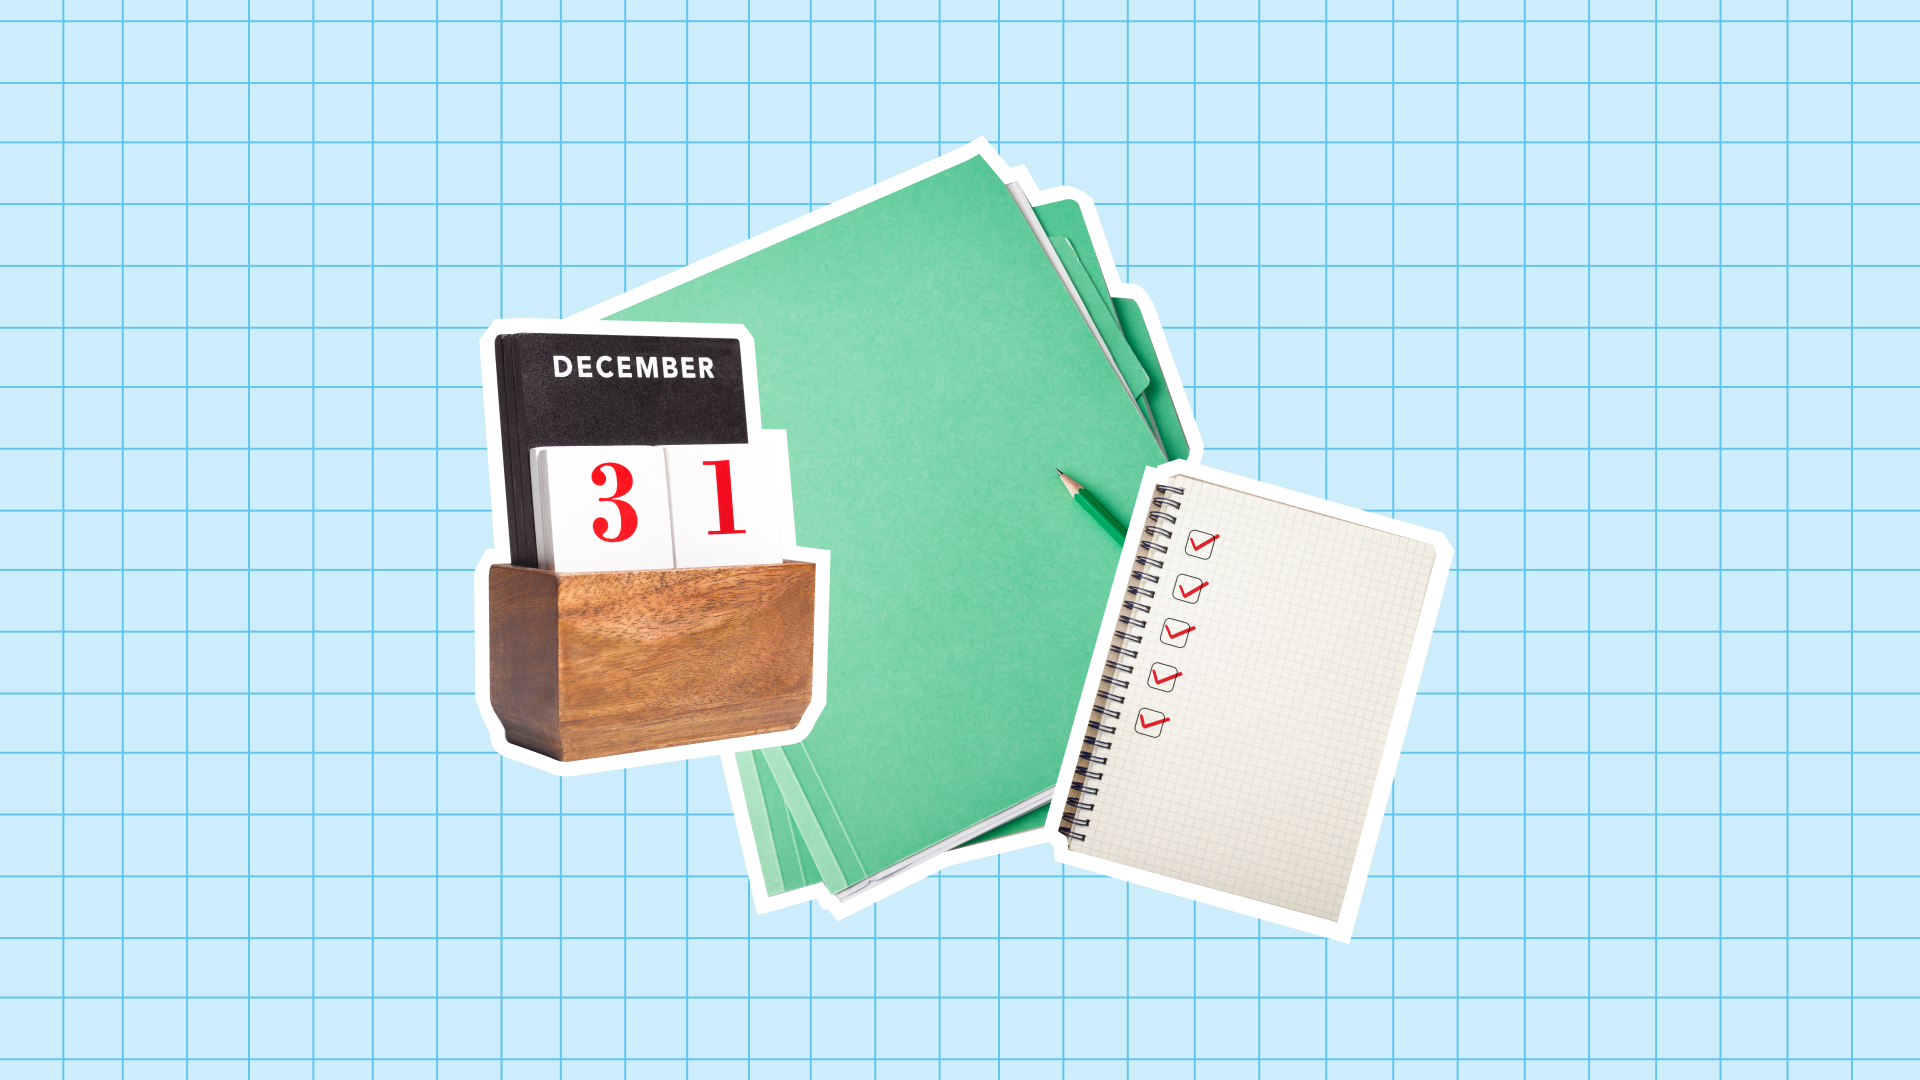 Blog - Hero - Use Our Simple Checklist for Your Business’ End of Year Tasks